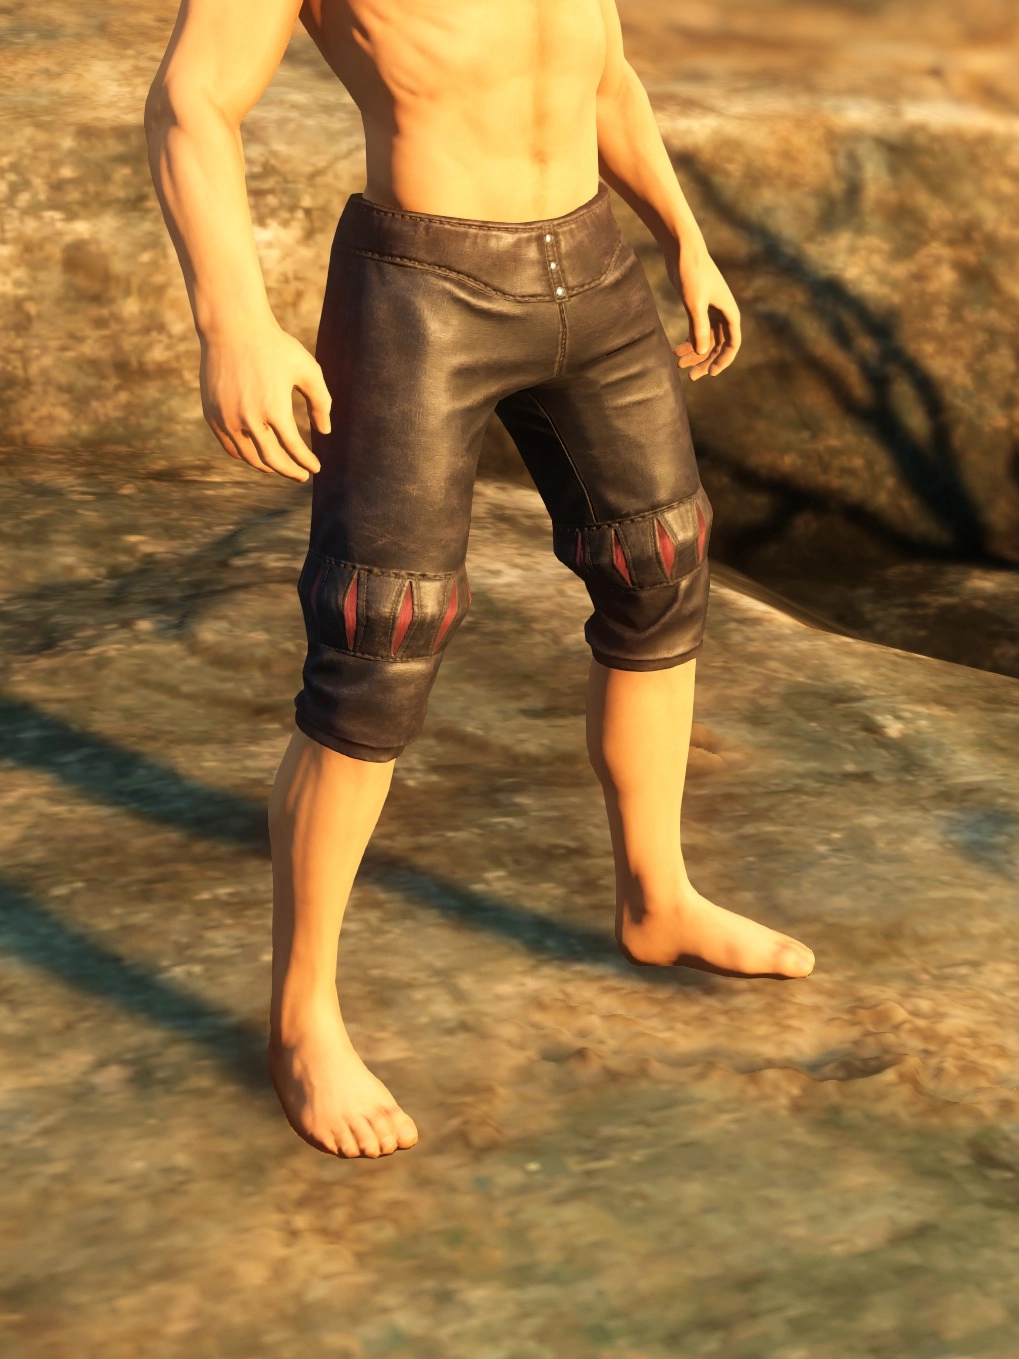 Fletched Leggings of the Augur